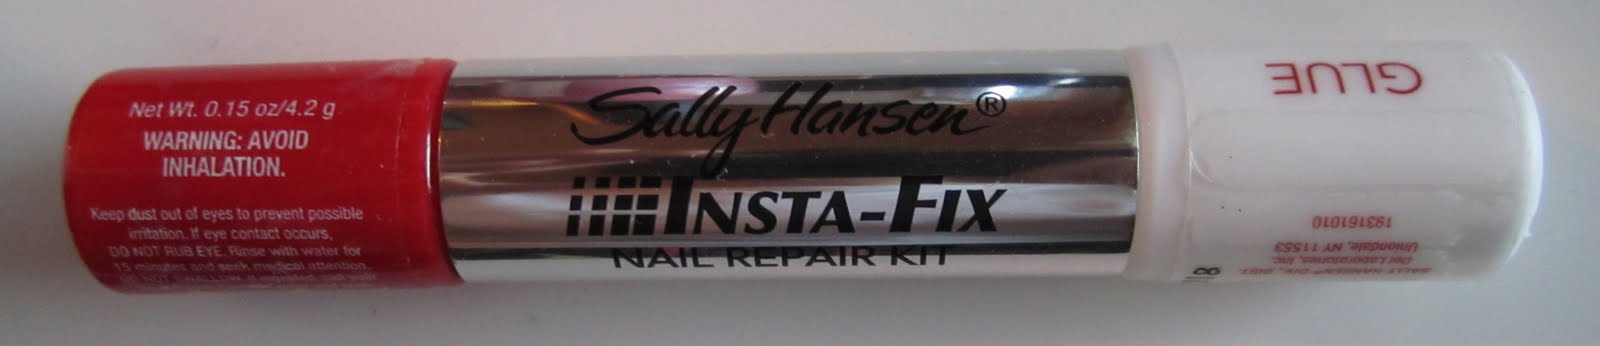 Well, I had recently purchased Sally Hansen Insta-Fix Nail Repair Kit